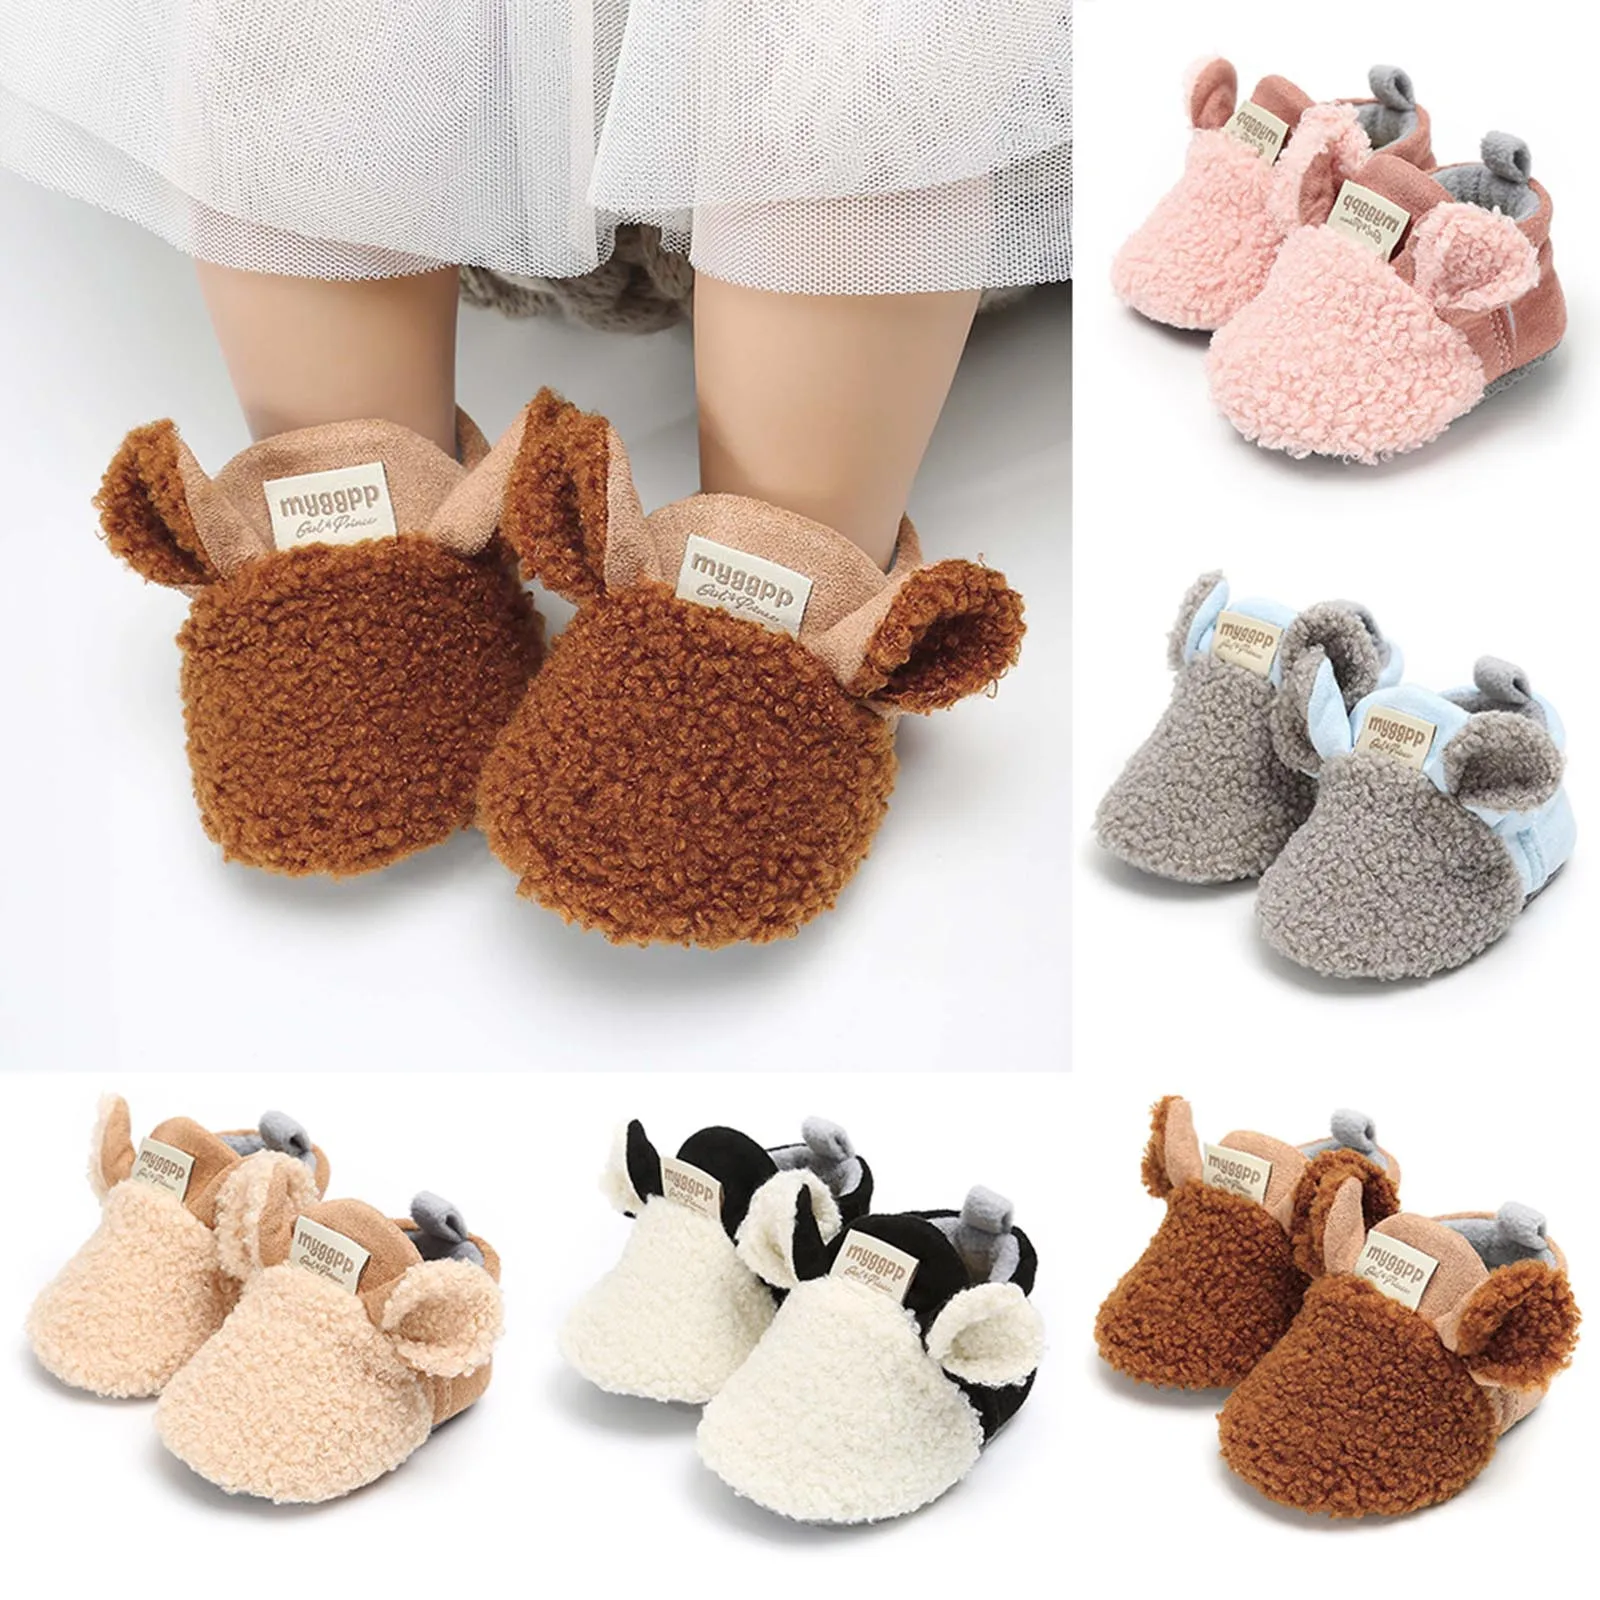 

2021 Autumn Winter Newborn Baby Shose Boys Girls Toddler Shoes Fleece Warm Soft Snow Booties Infant Shoes First Walkers 0-18m